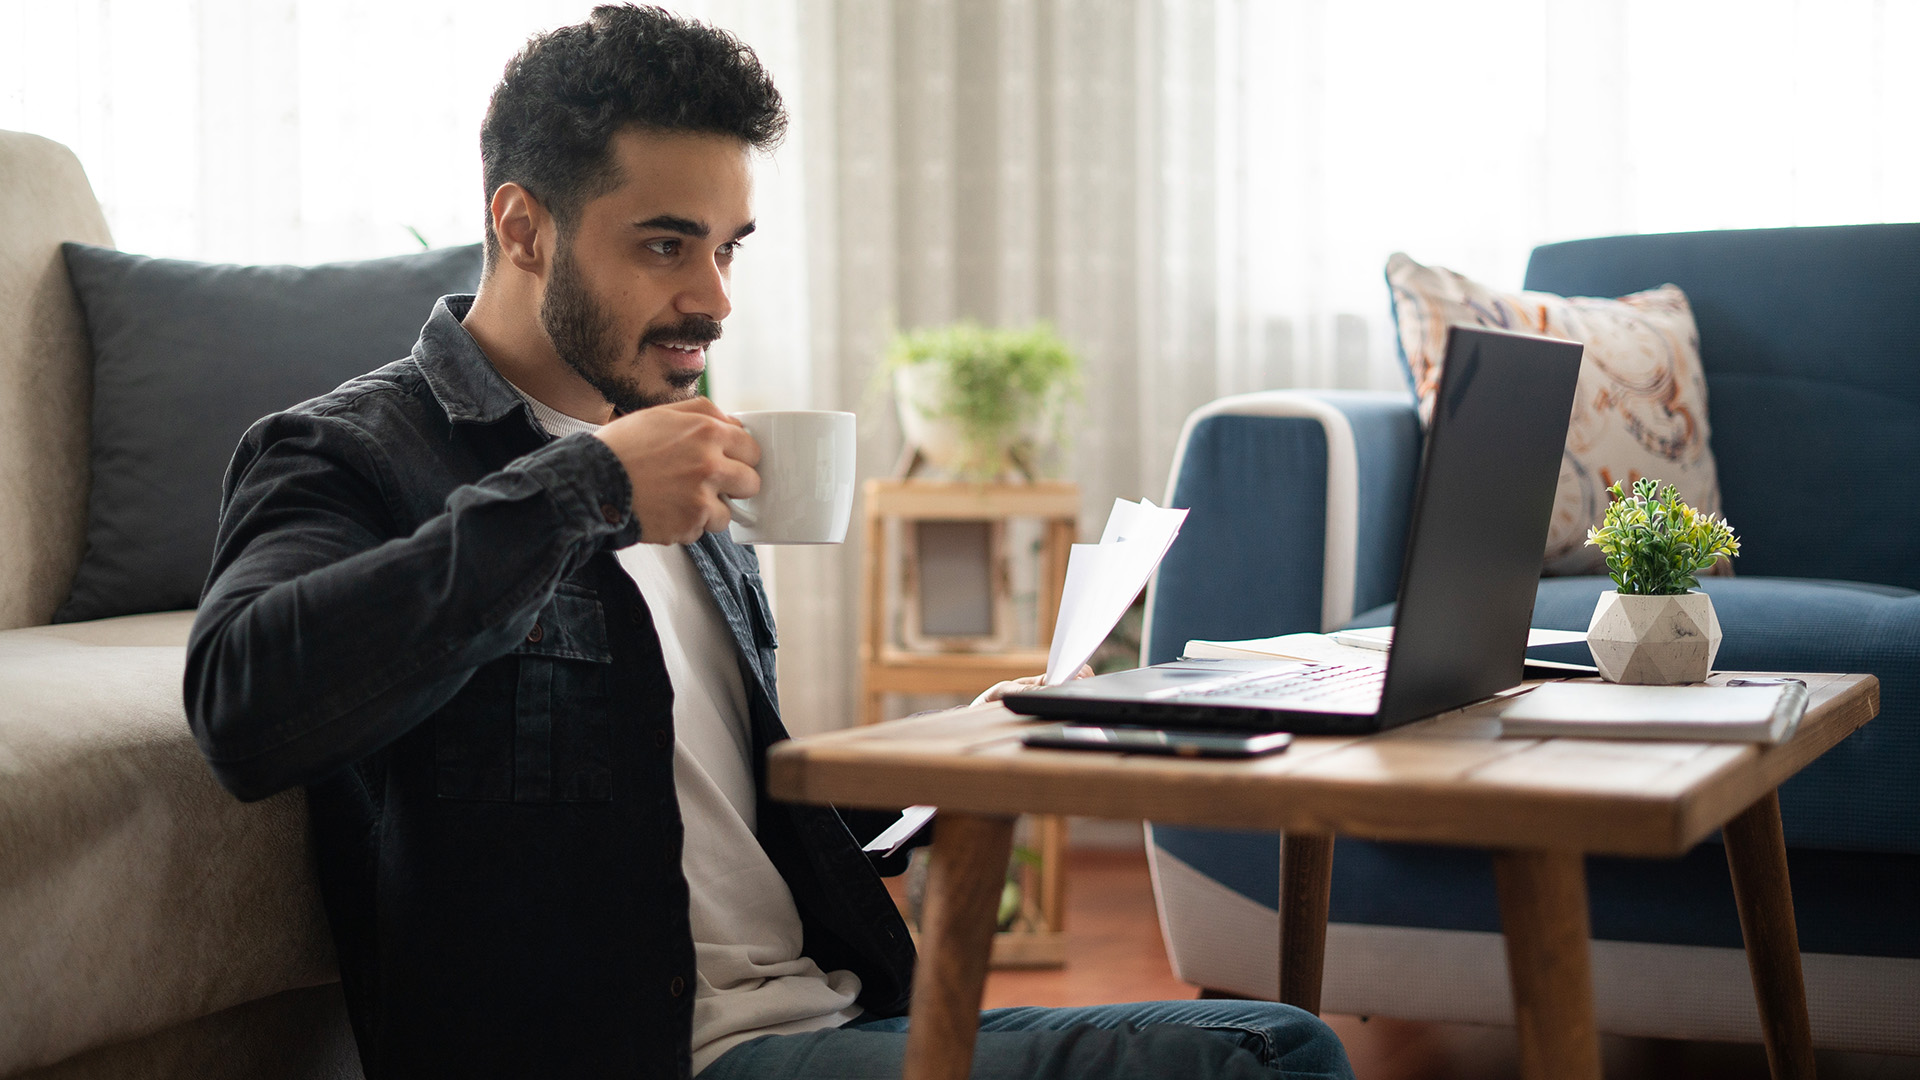 A man drinking coffee and learning more about Income-Based Repayment (IBR) to manage his student loans on a laptop.